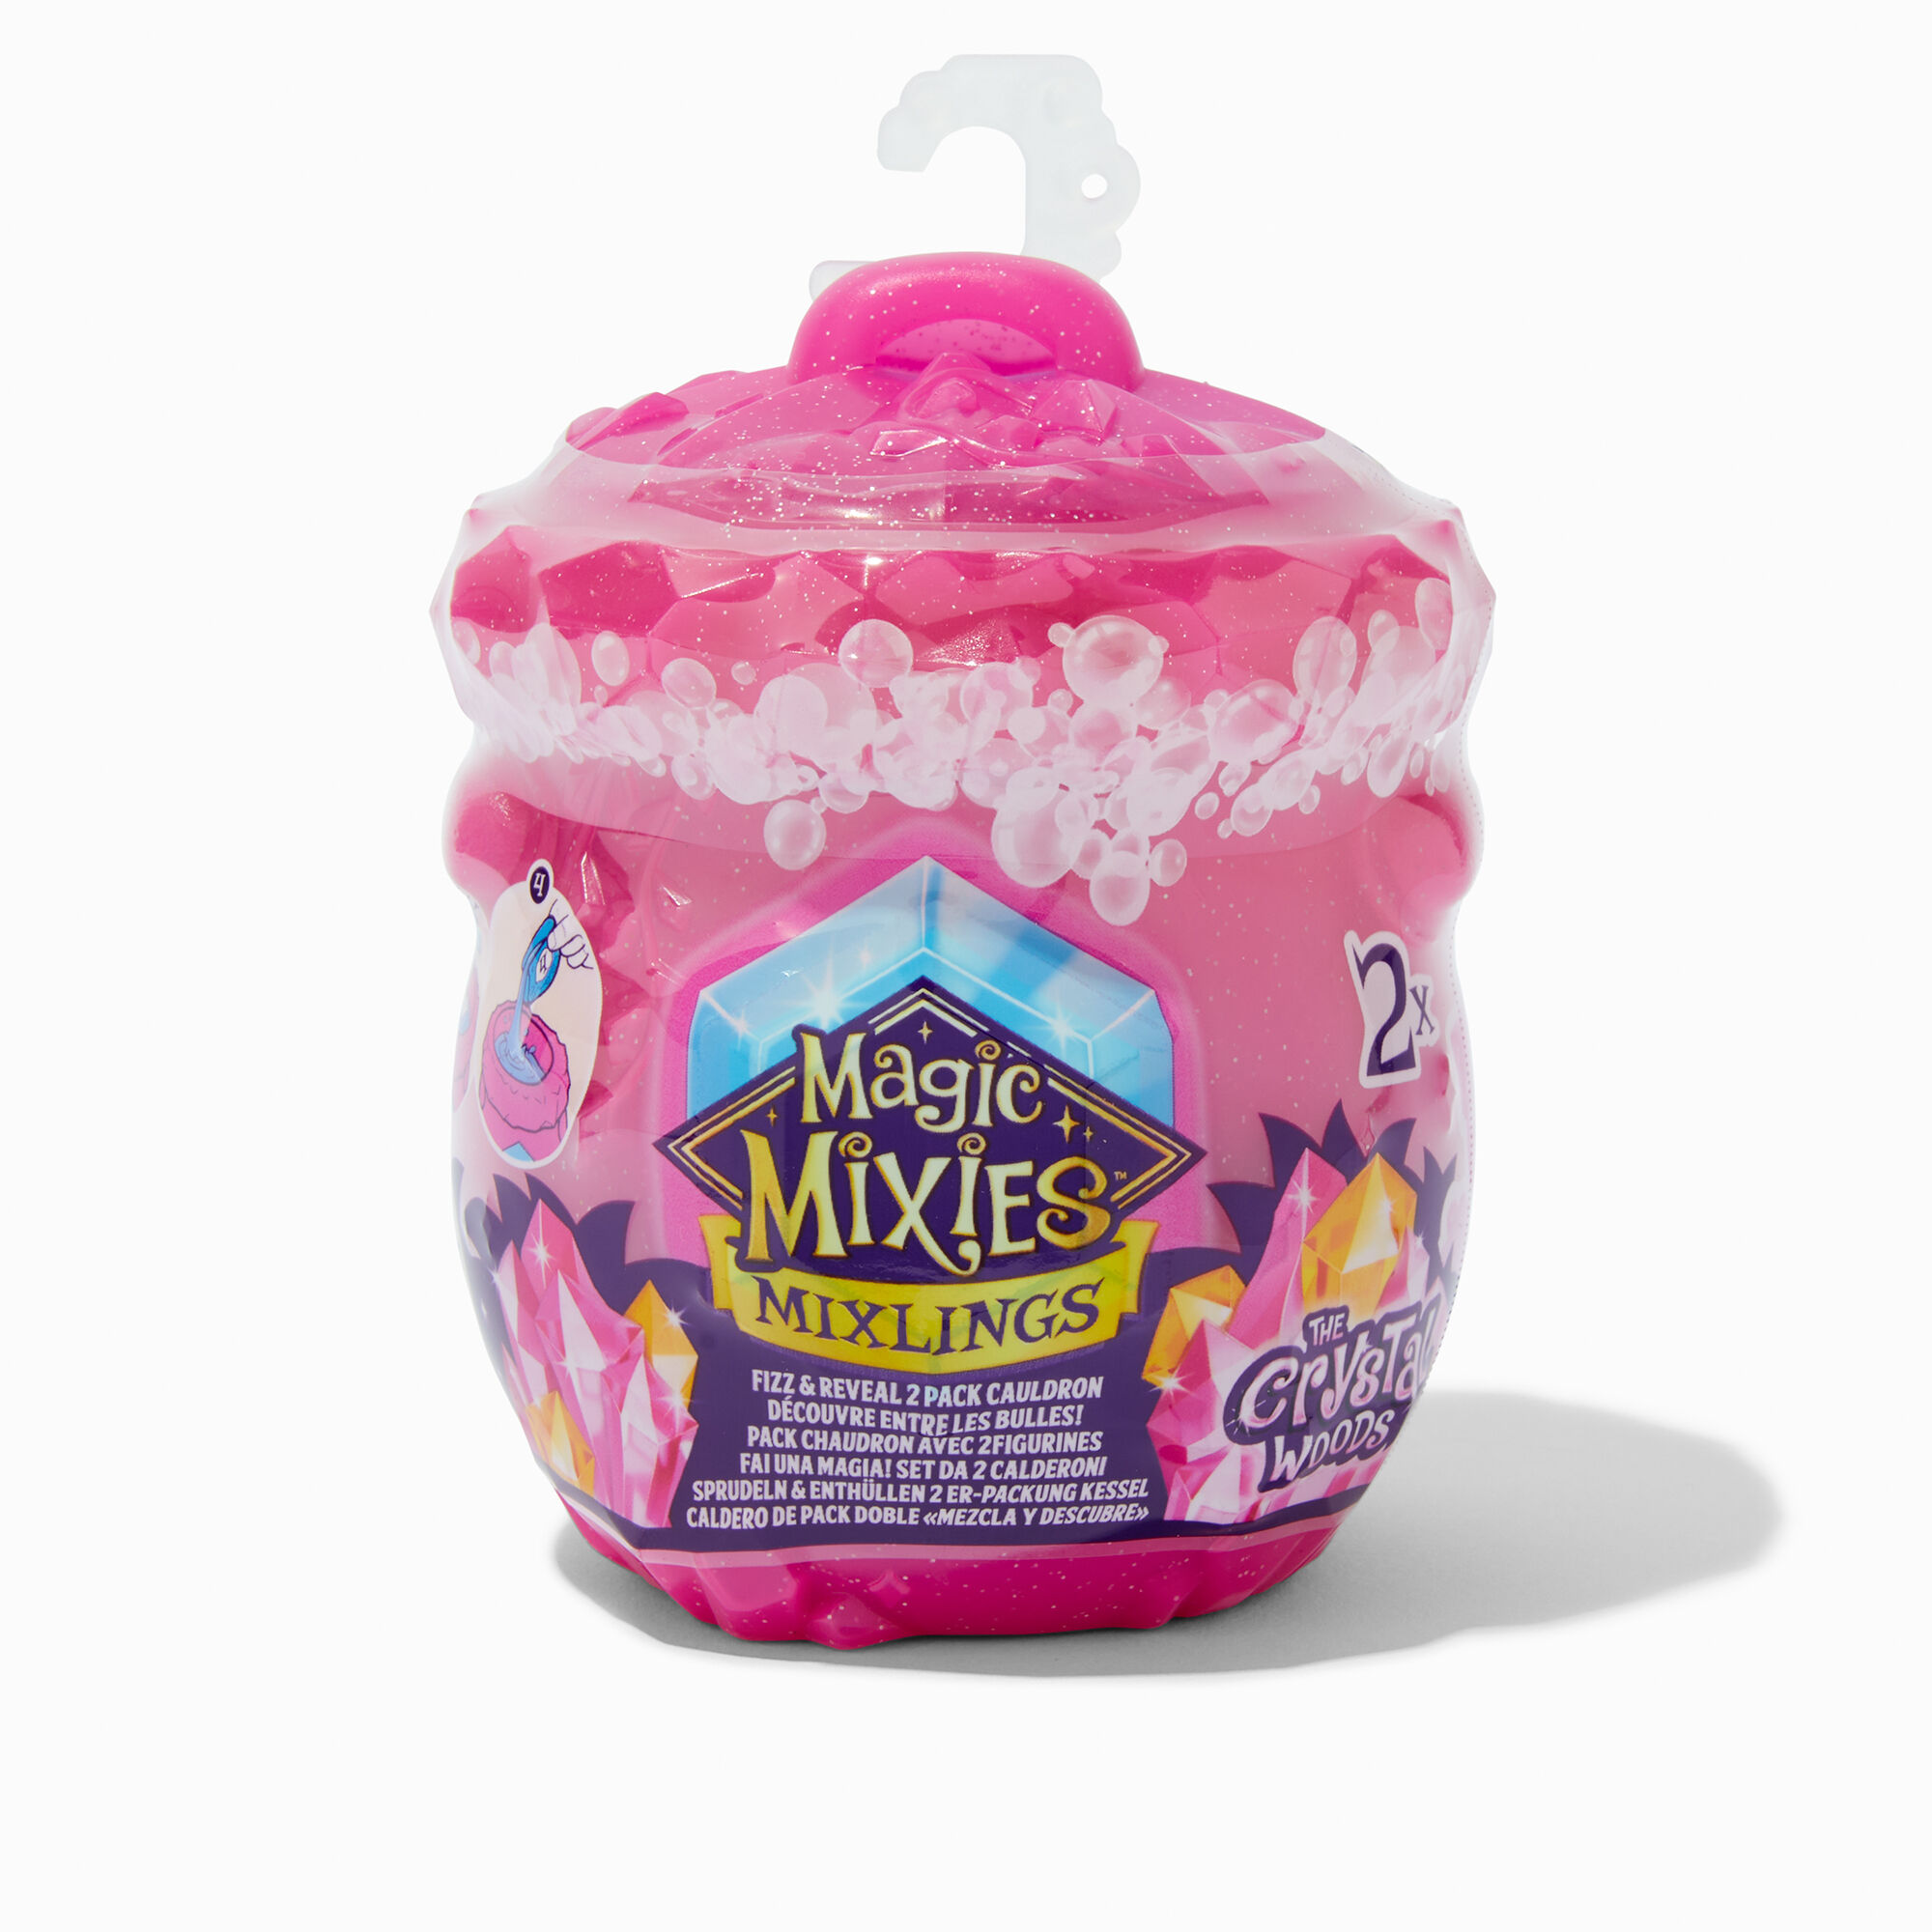 View Claires Magic Mixies Mixlings Cauldron Series 3 Blind Bag 2 Pack Styles Vary information